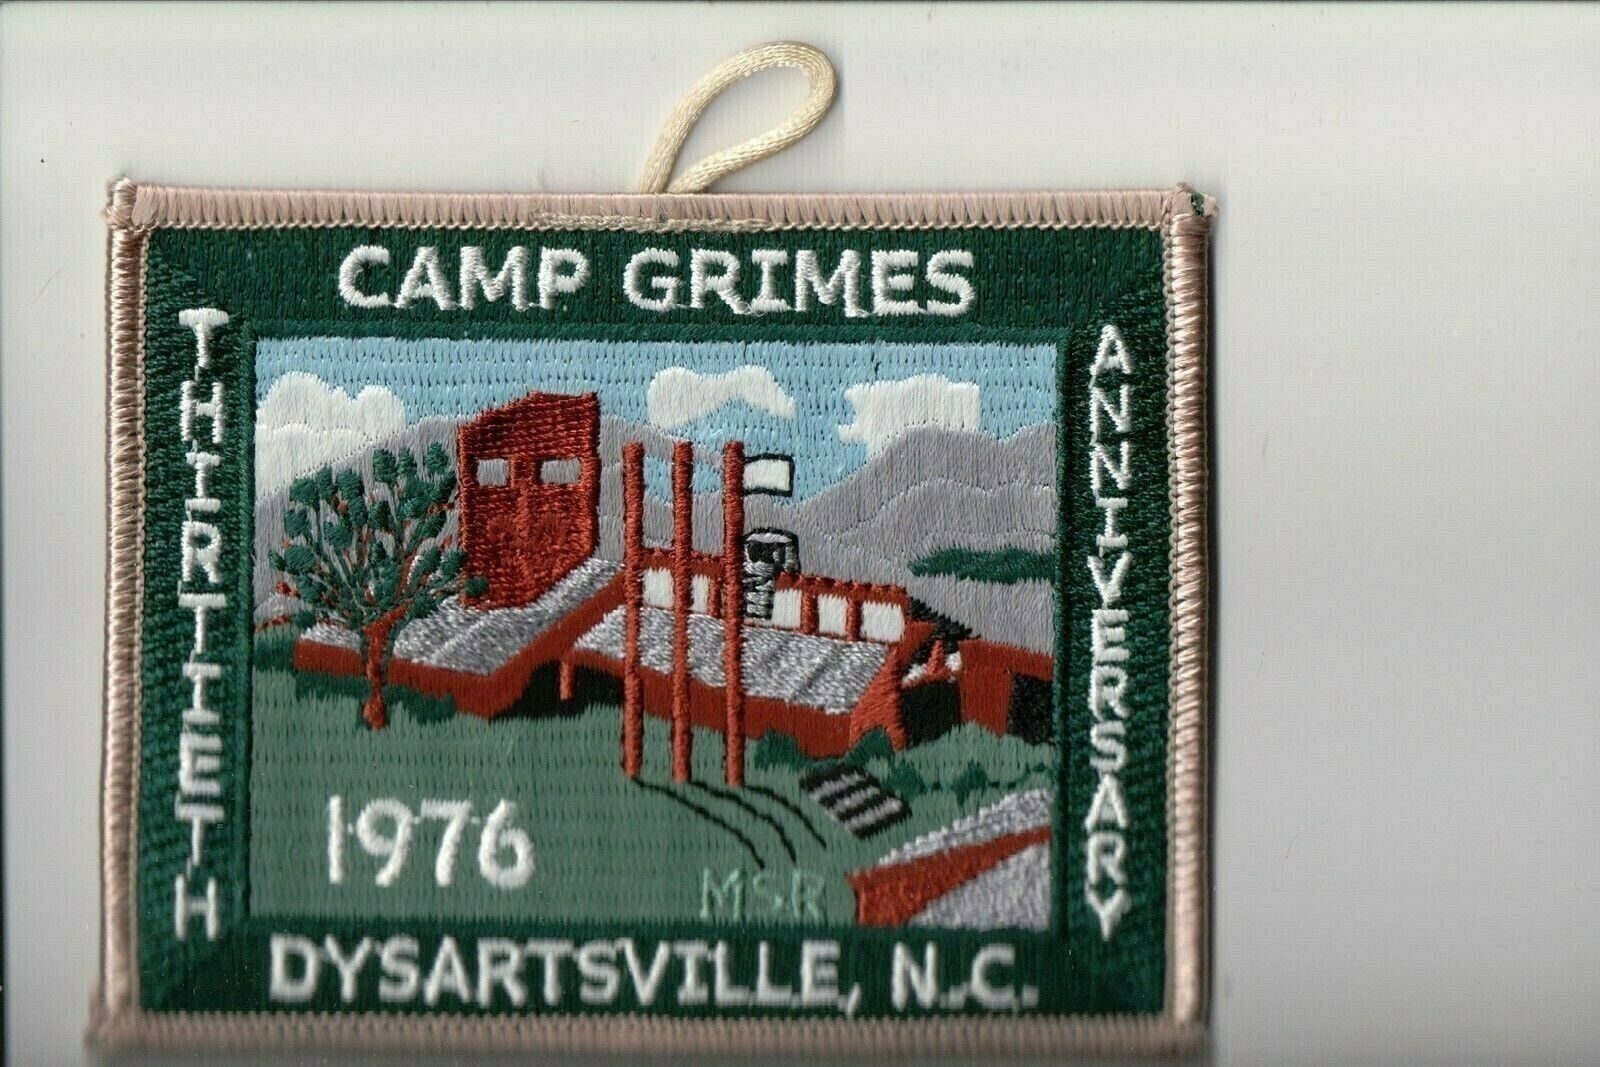 1976 Camp Grimes 30th Anniversary patch